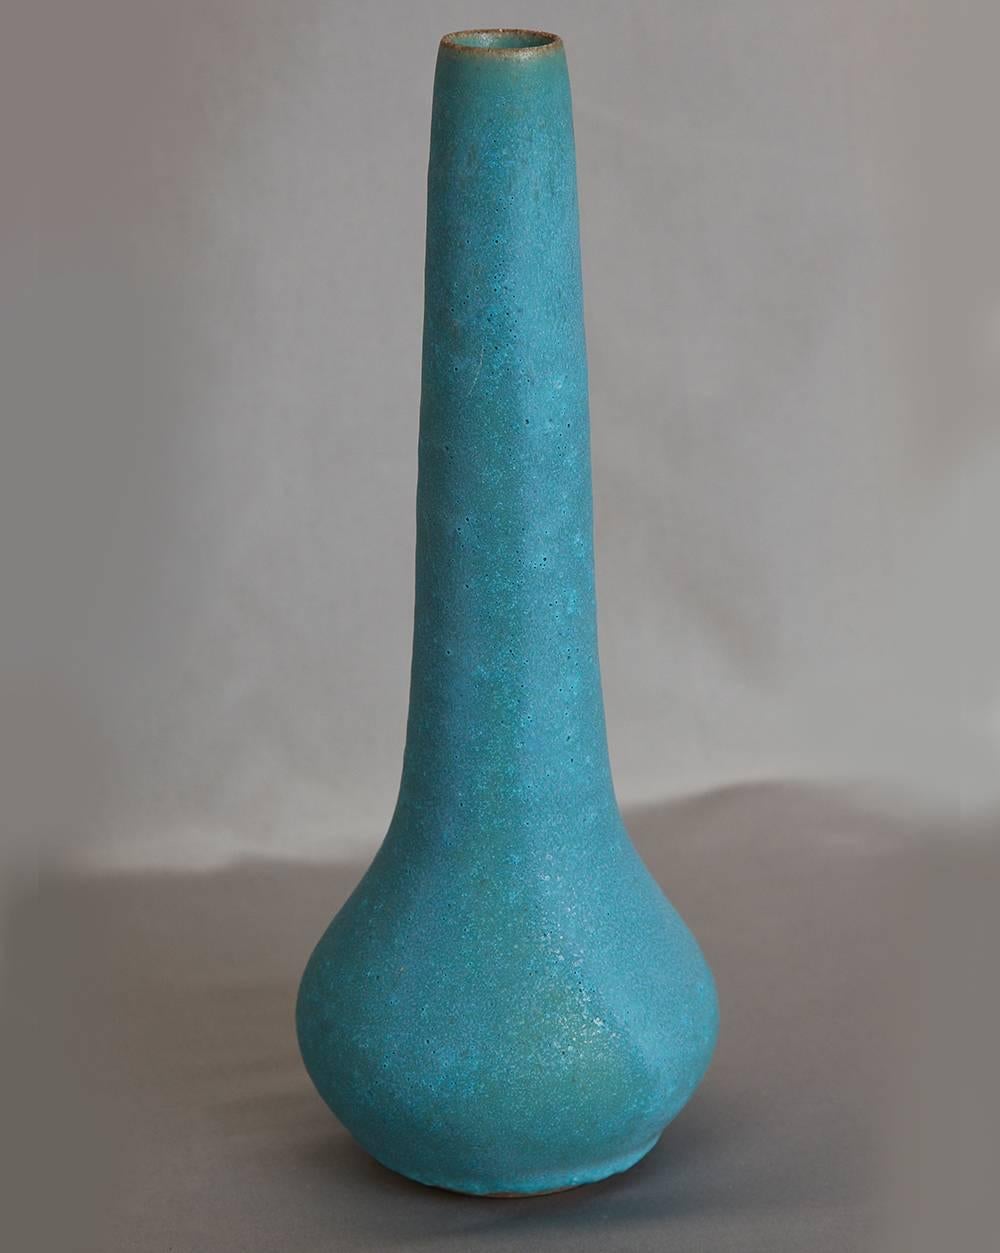 Sandra Zeenni. 
“Turquoise Vase Zu”, 2014. 
Stoneware vessel with matte turquoise glaze. 
Signed SaZe. 

Based in Paris, Sandra's work has been included in museum exhibitions, recently 